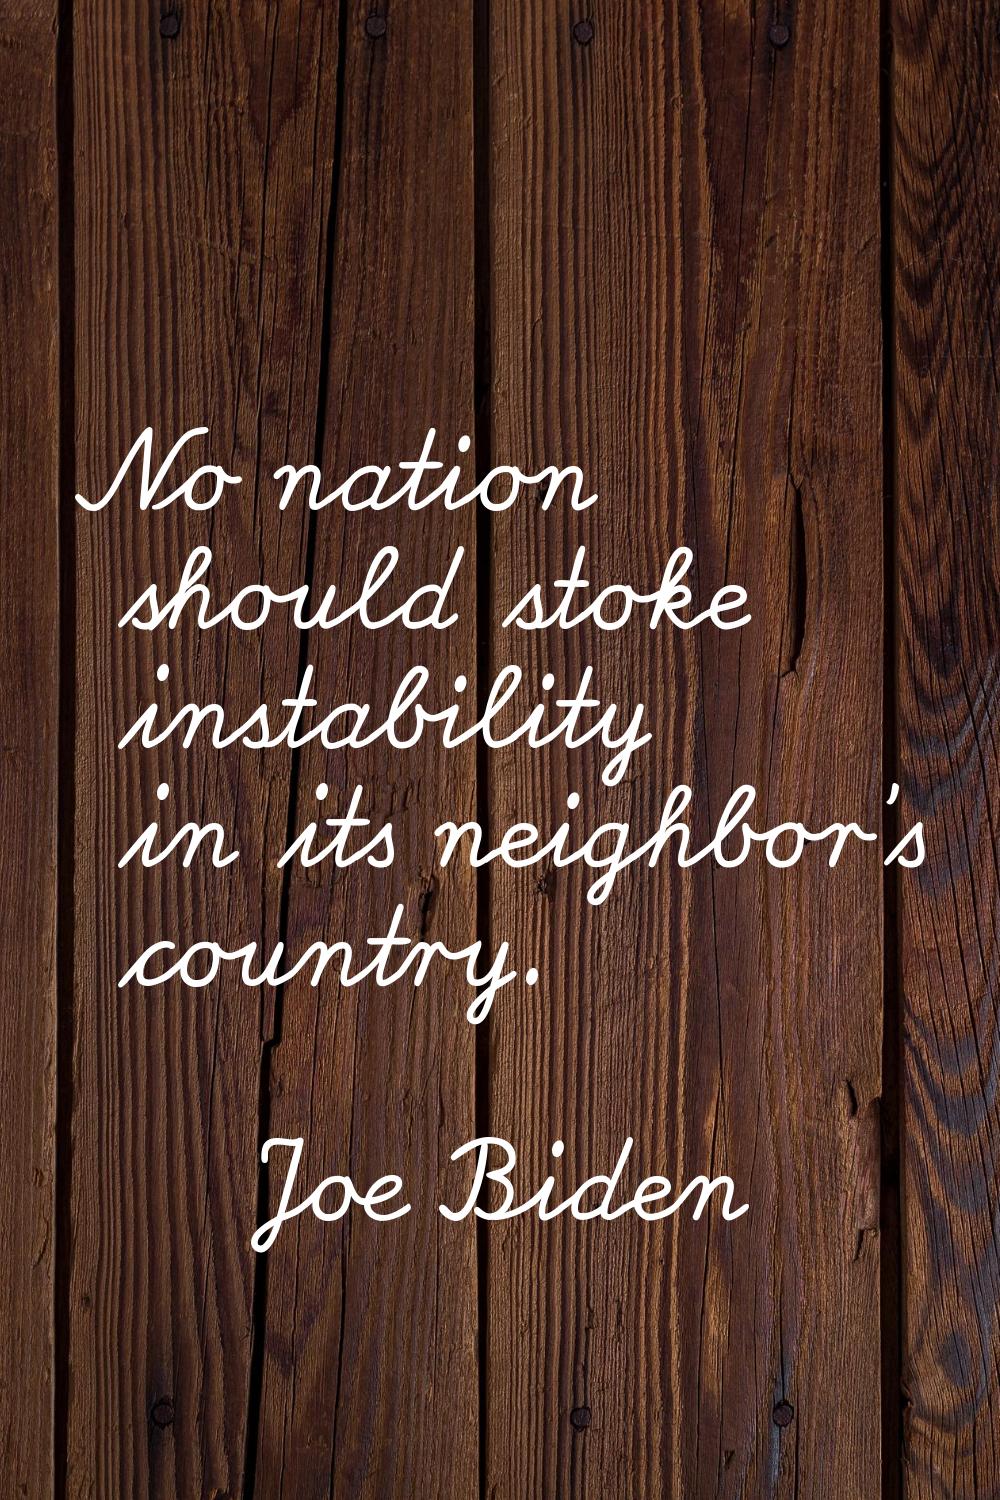 No nation should stoke instability in its neighbor's country.